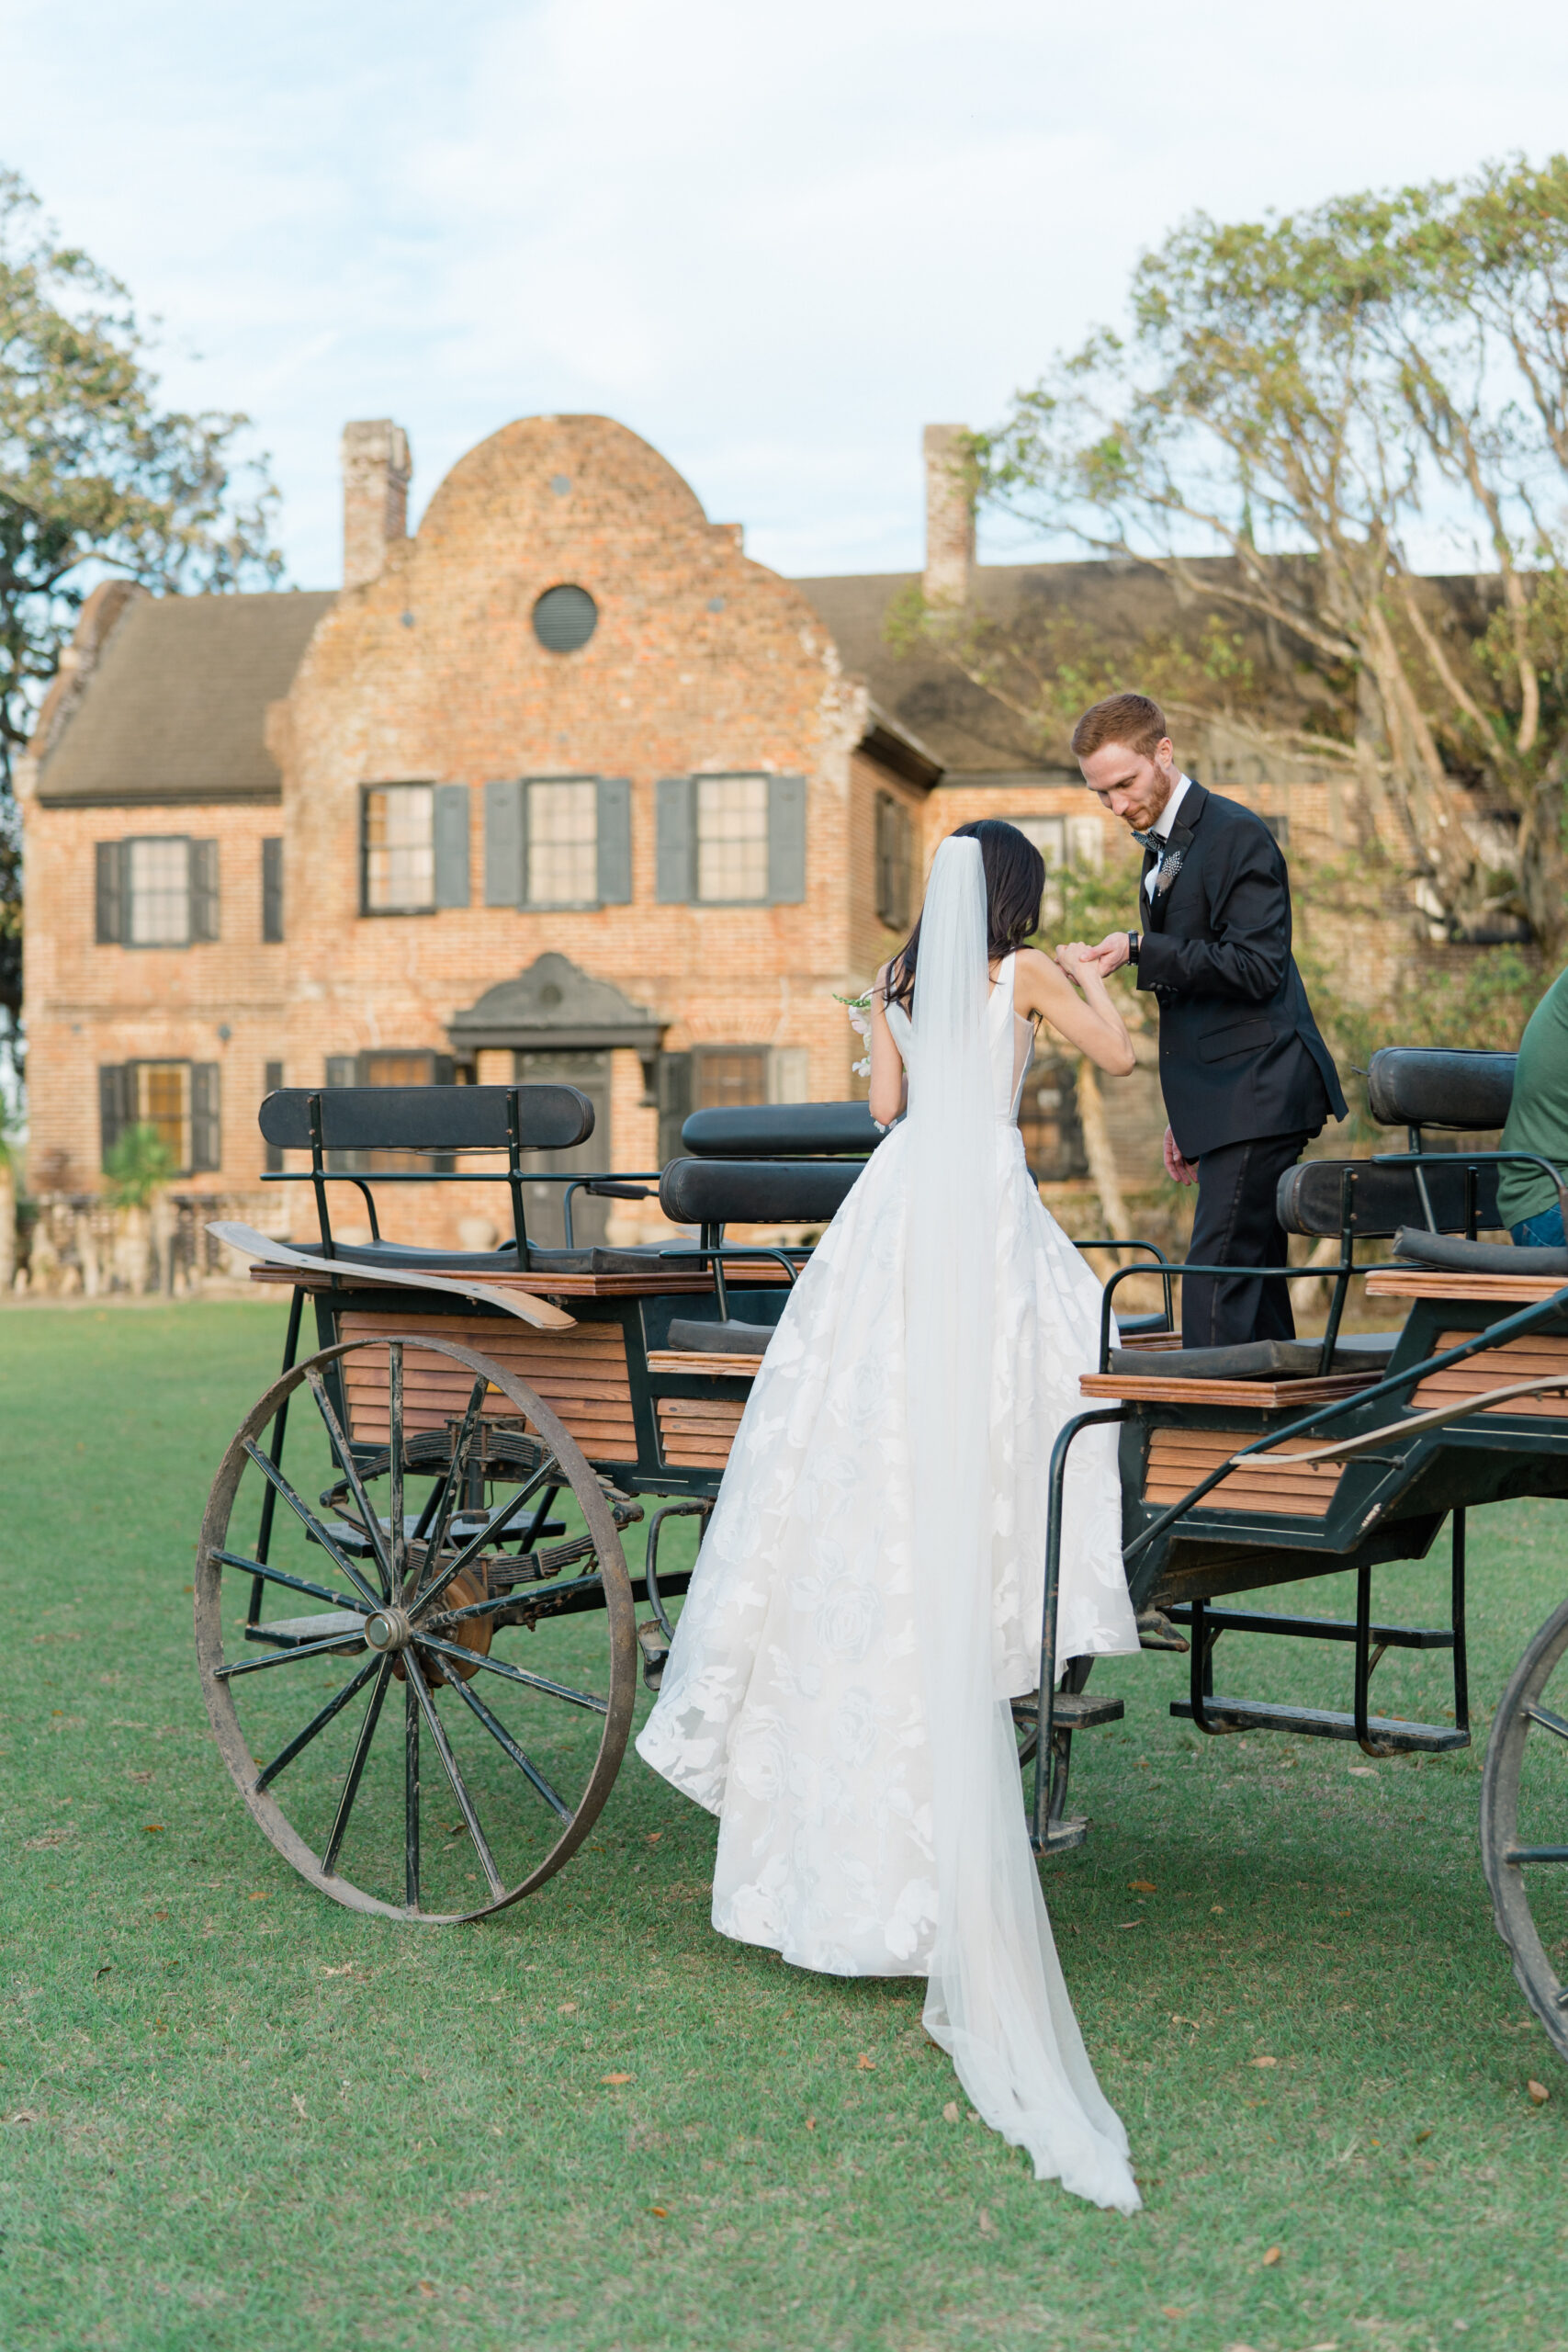 Groom helps bride get on carriage. Horse and carriage ride after wedding ceremony at Charleston wedding.